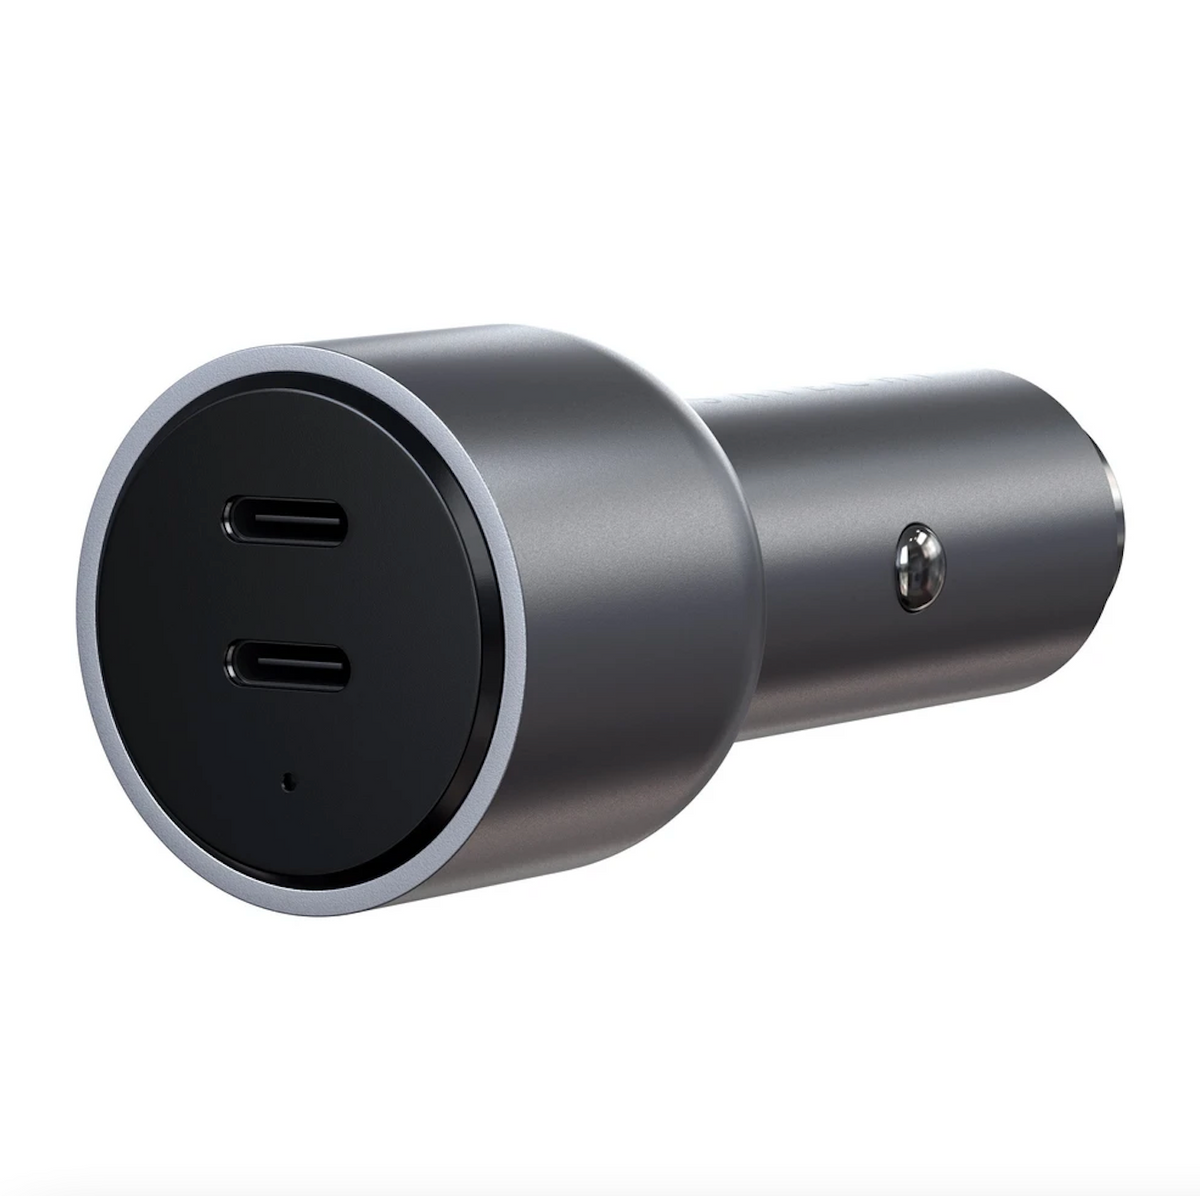 Satechi 40W Dual USB-C PD Car Charger